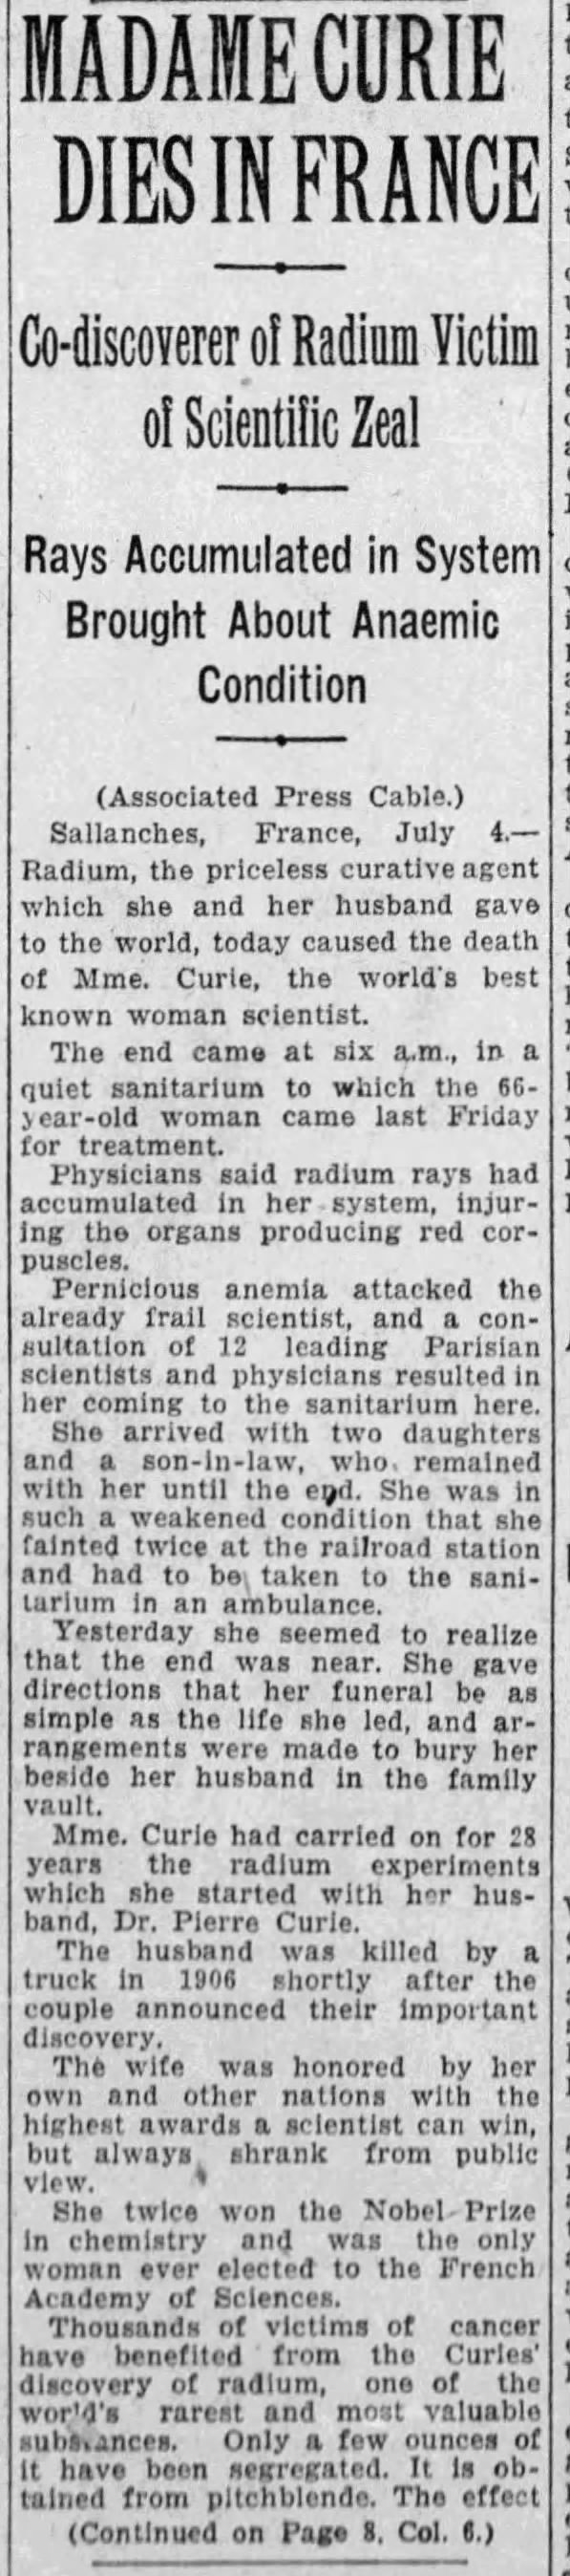 Excerpt from obituary for Marie Curie after her death on July 4, 1934